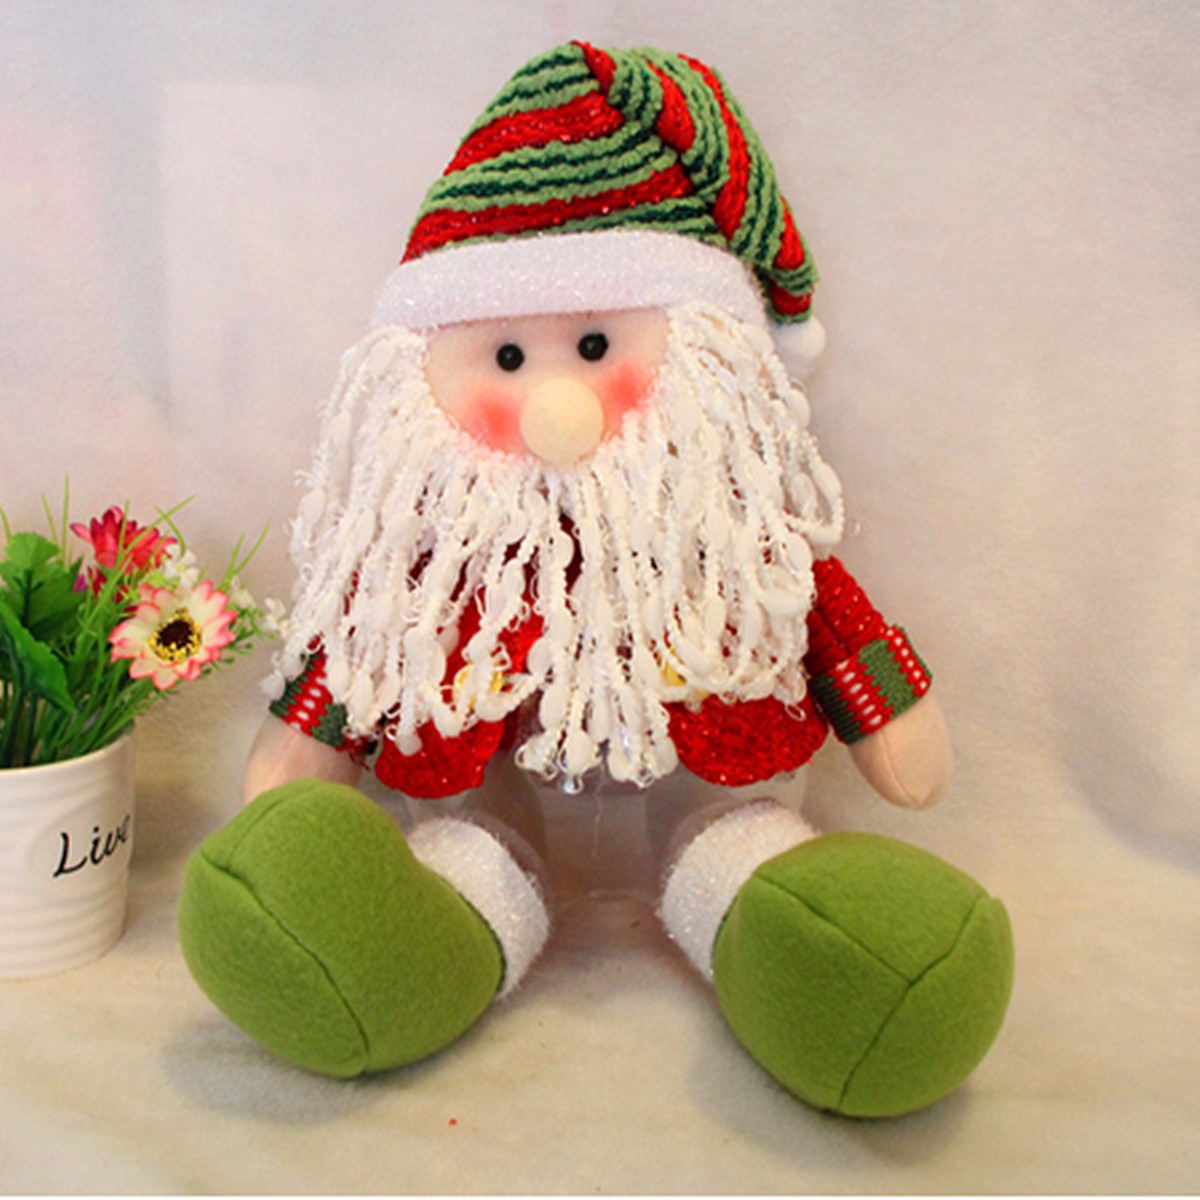 Lovely Snowman Santa Claus Candy Round Jar Bottle Christmas Kid Toy Doll Gift Decor - Photo: 6